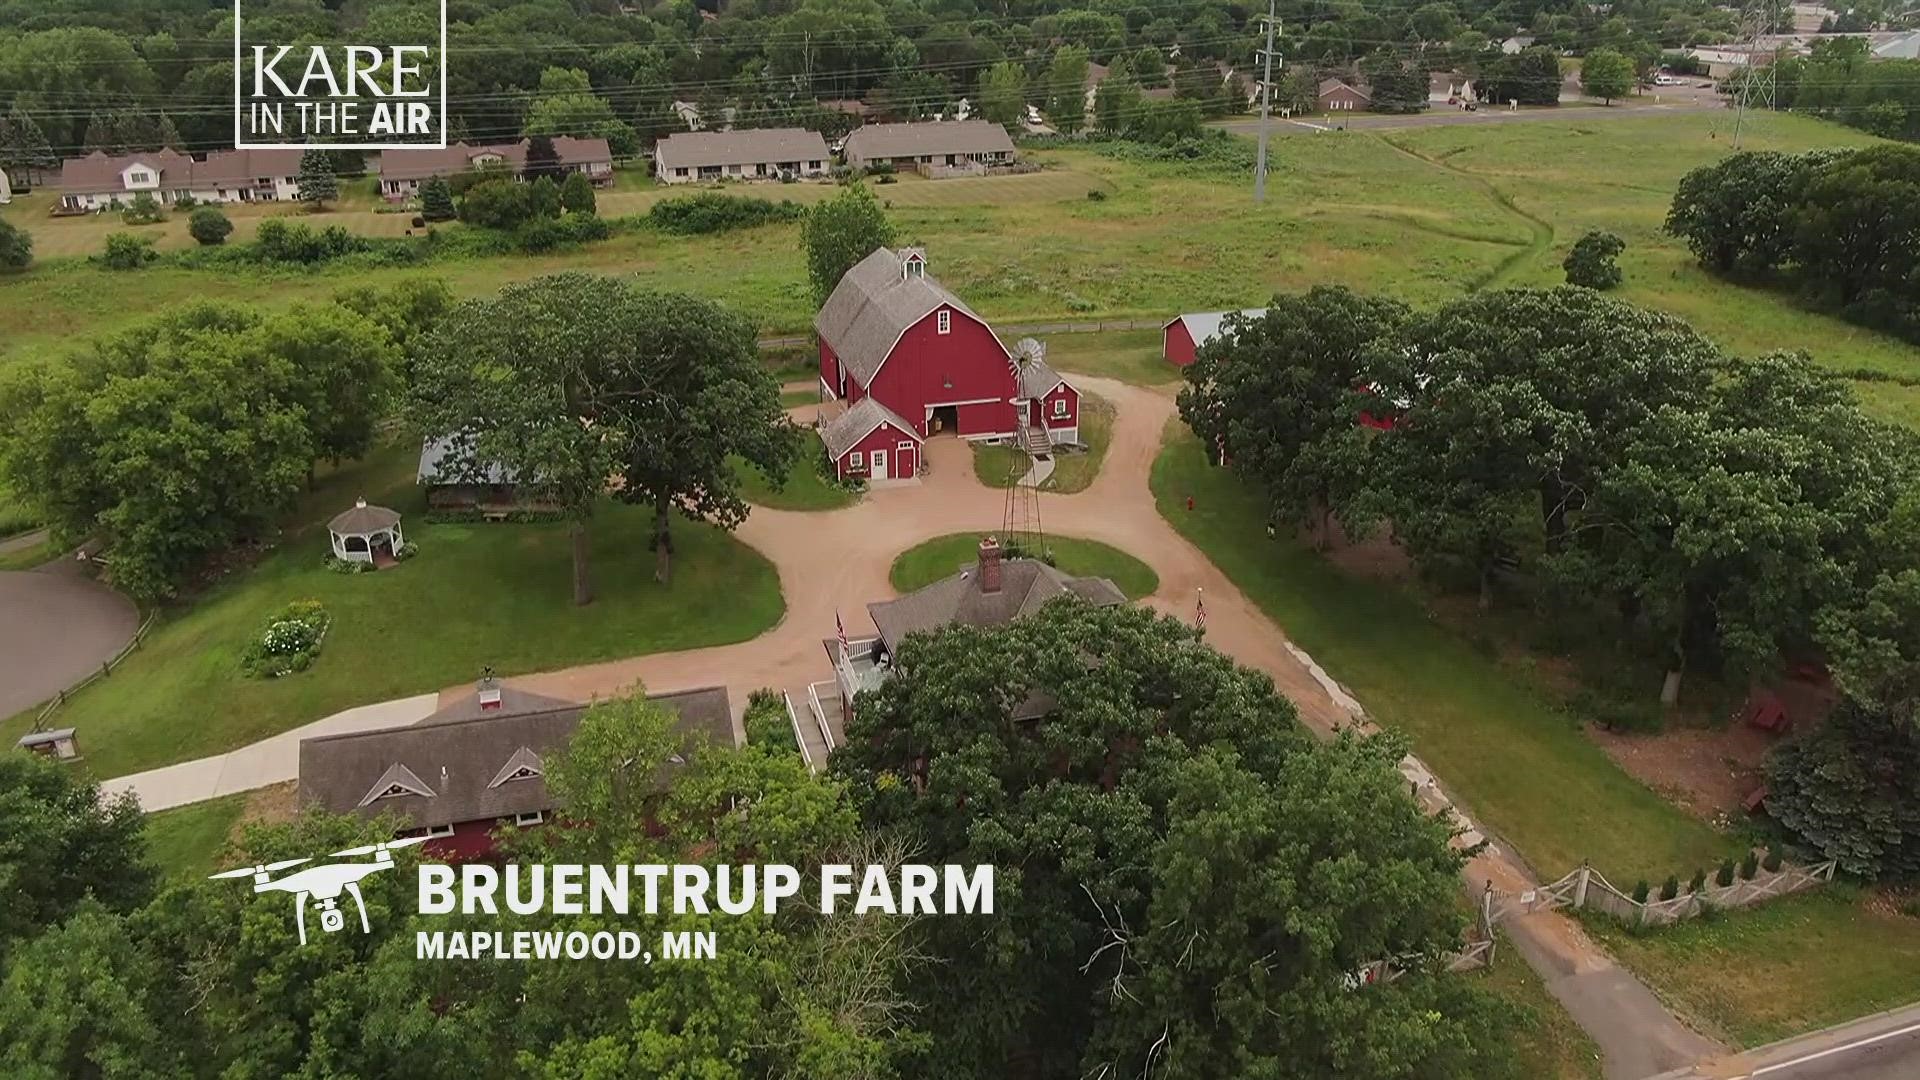 Four generations of the Bruentrup family farmed the plot in Maplewood before most of the land was sold off for development. But some of the classic buildings remain.